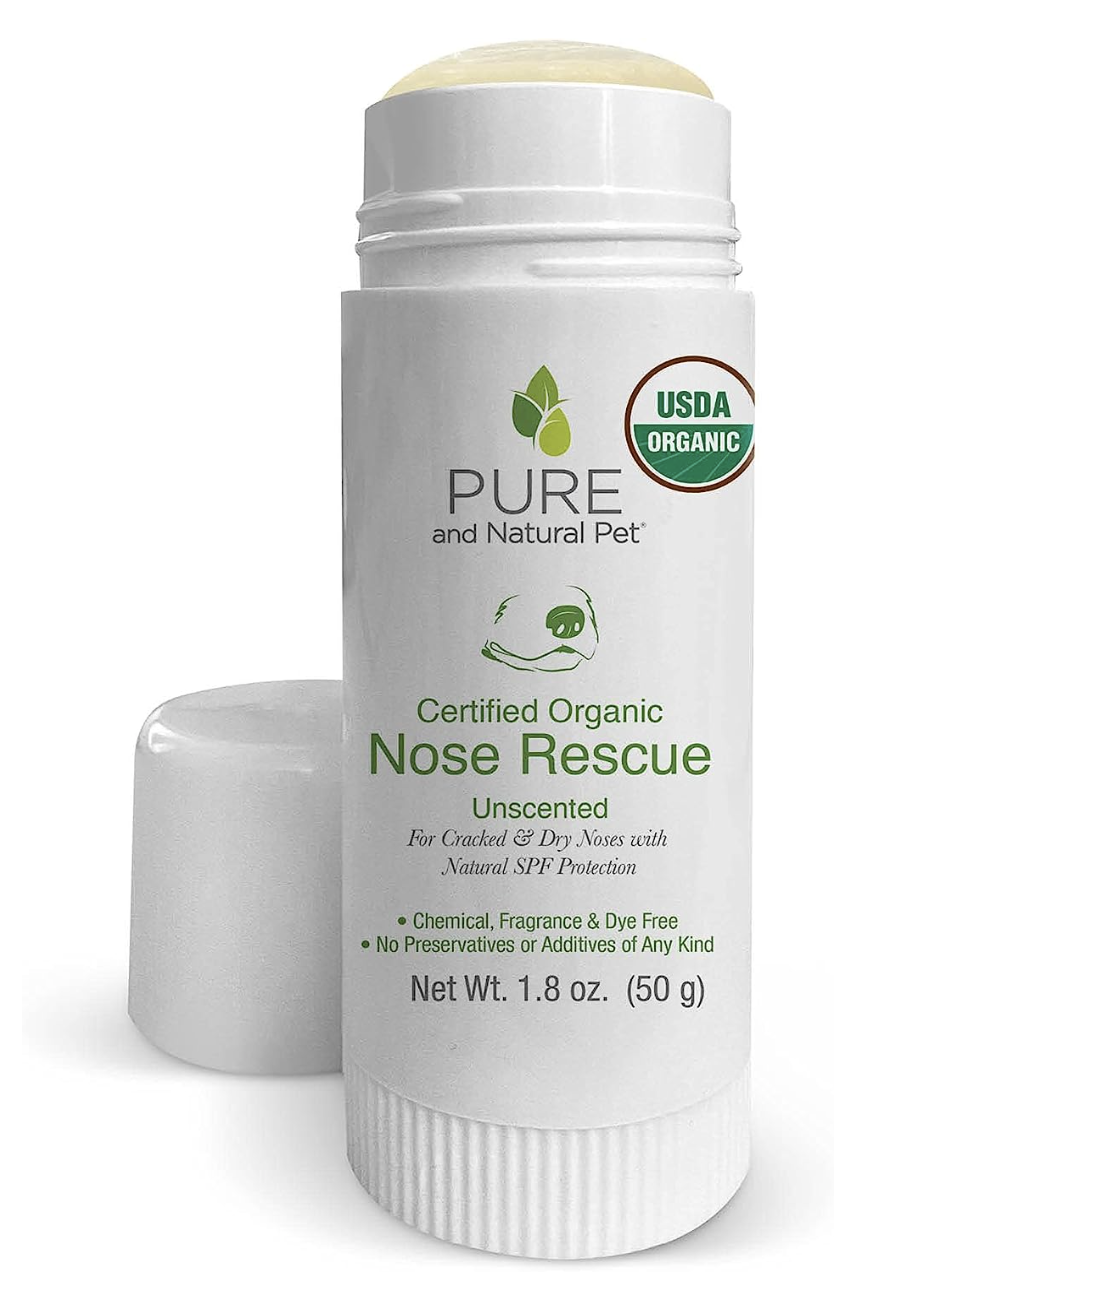 Pure and Natural Pet Organic Nose Rescue